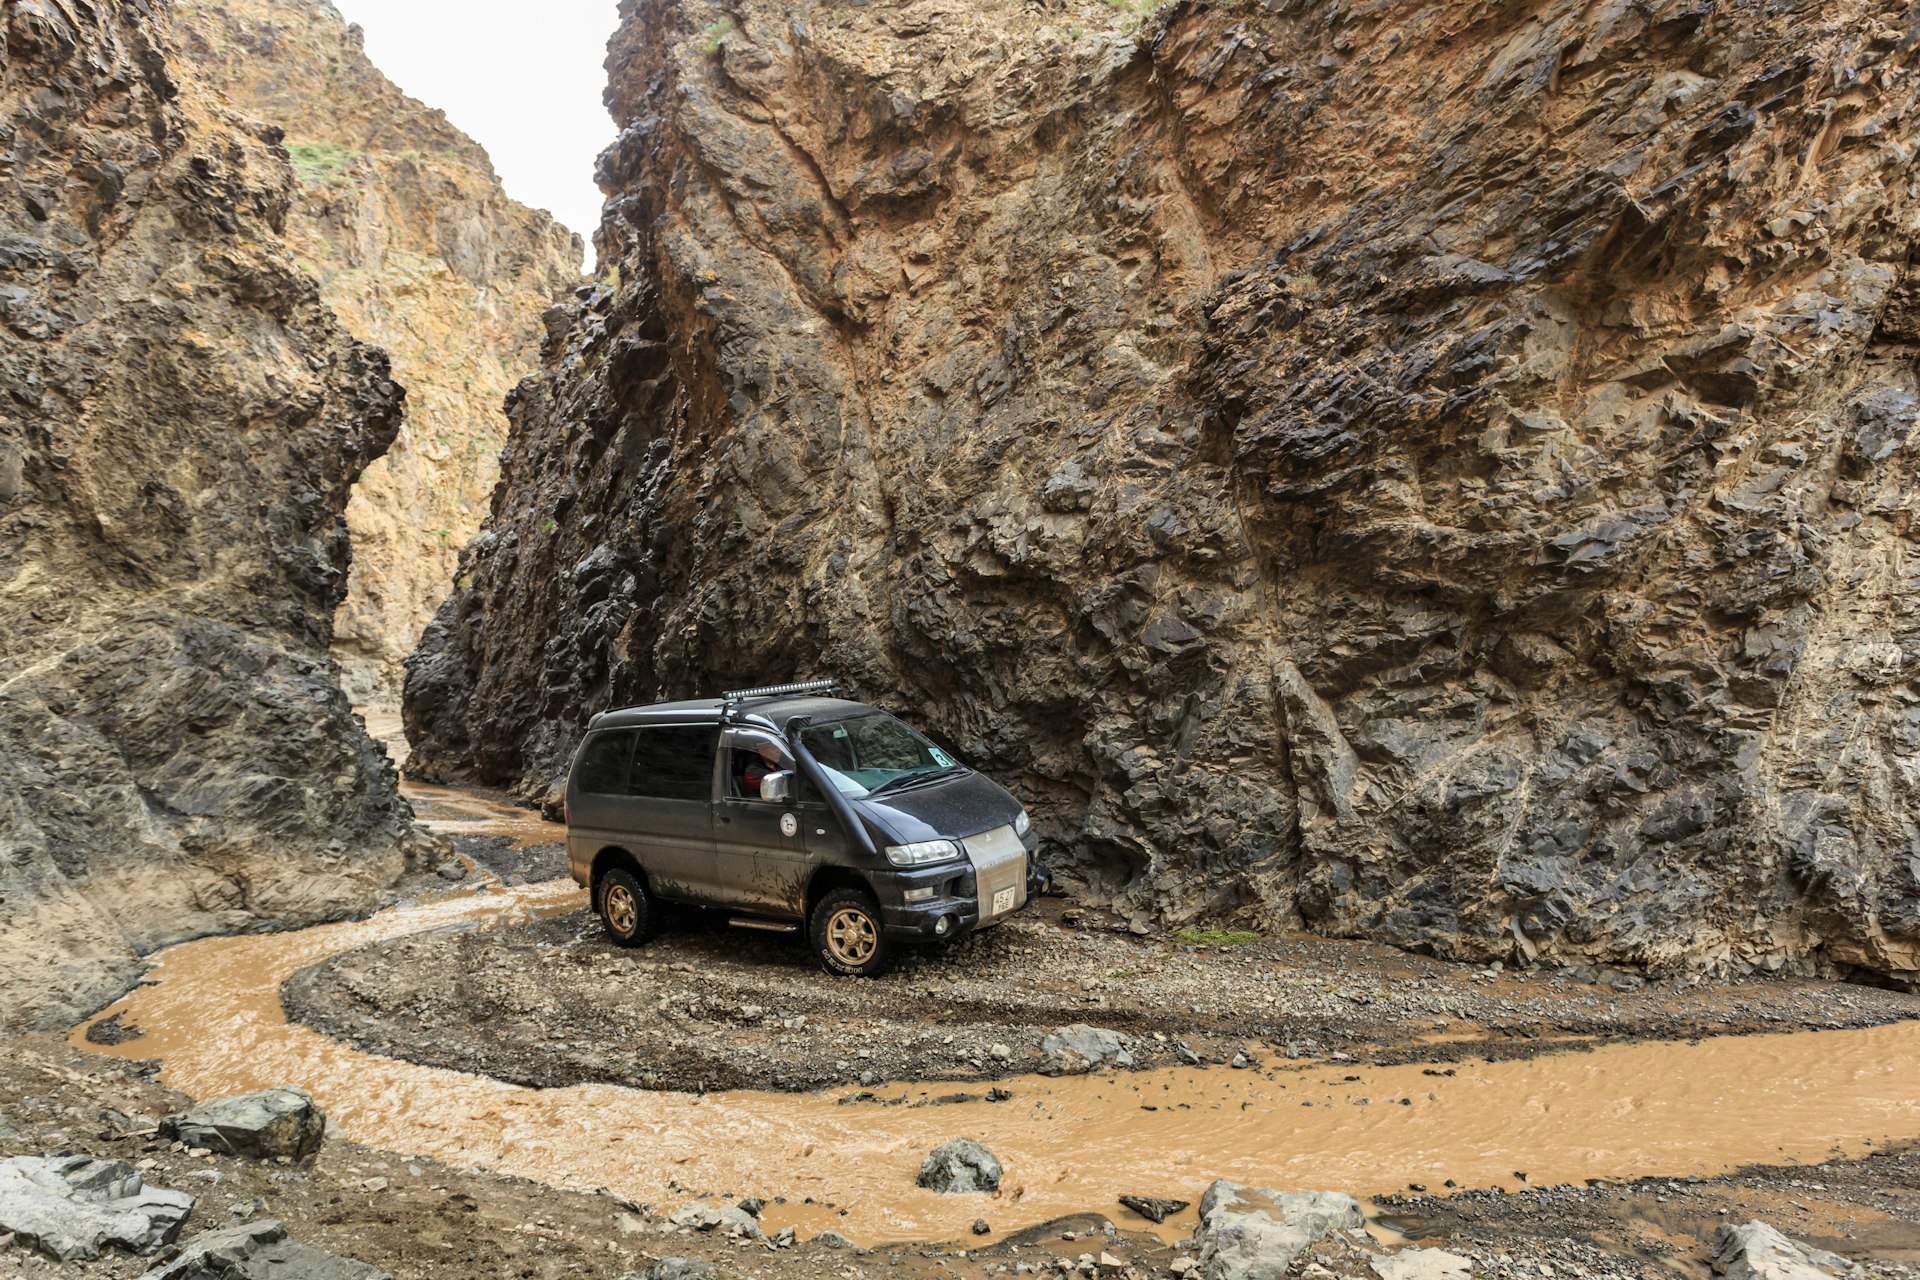 An off-road vehicle travels along a rocky gorge in the mountains of the Gobi, Gurvan Saikhan National Park, Mongolia